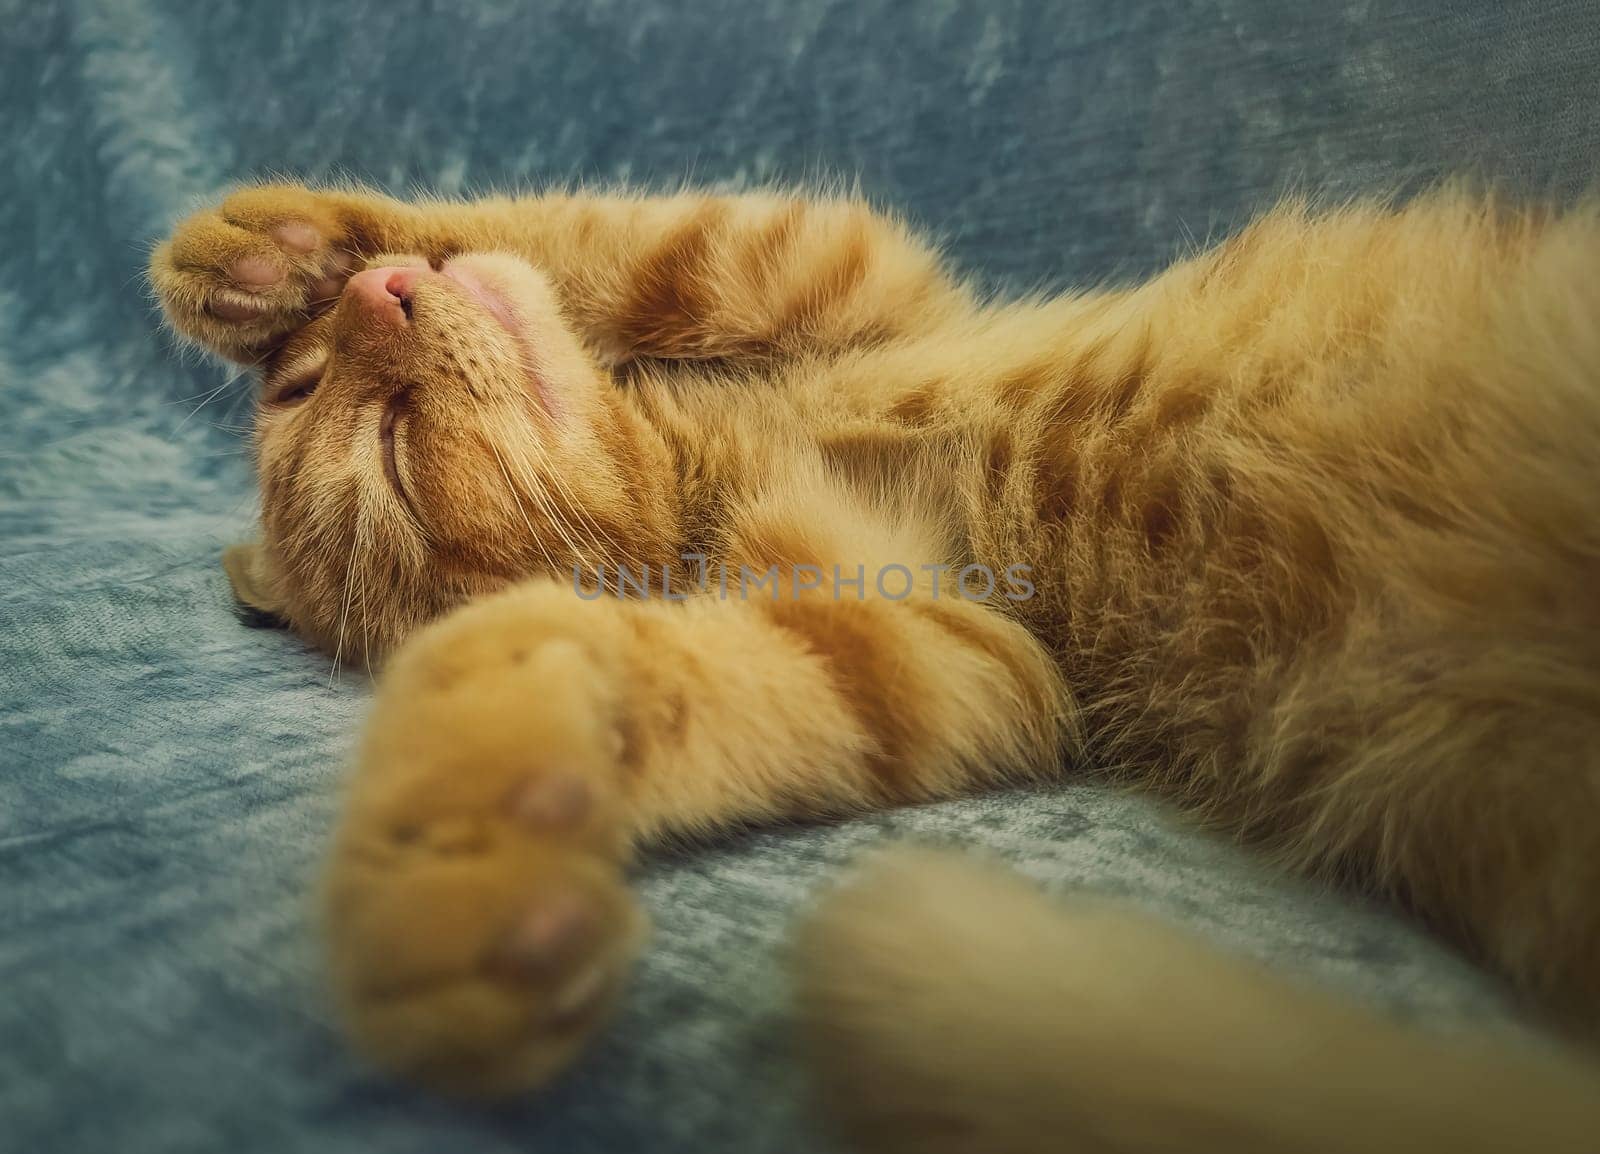 Sleepy orange kitten takes a nap indoors on the sofa. Little ginger cat sleeping tight in a cute position, covering muzzle with her paws by psychoshadow